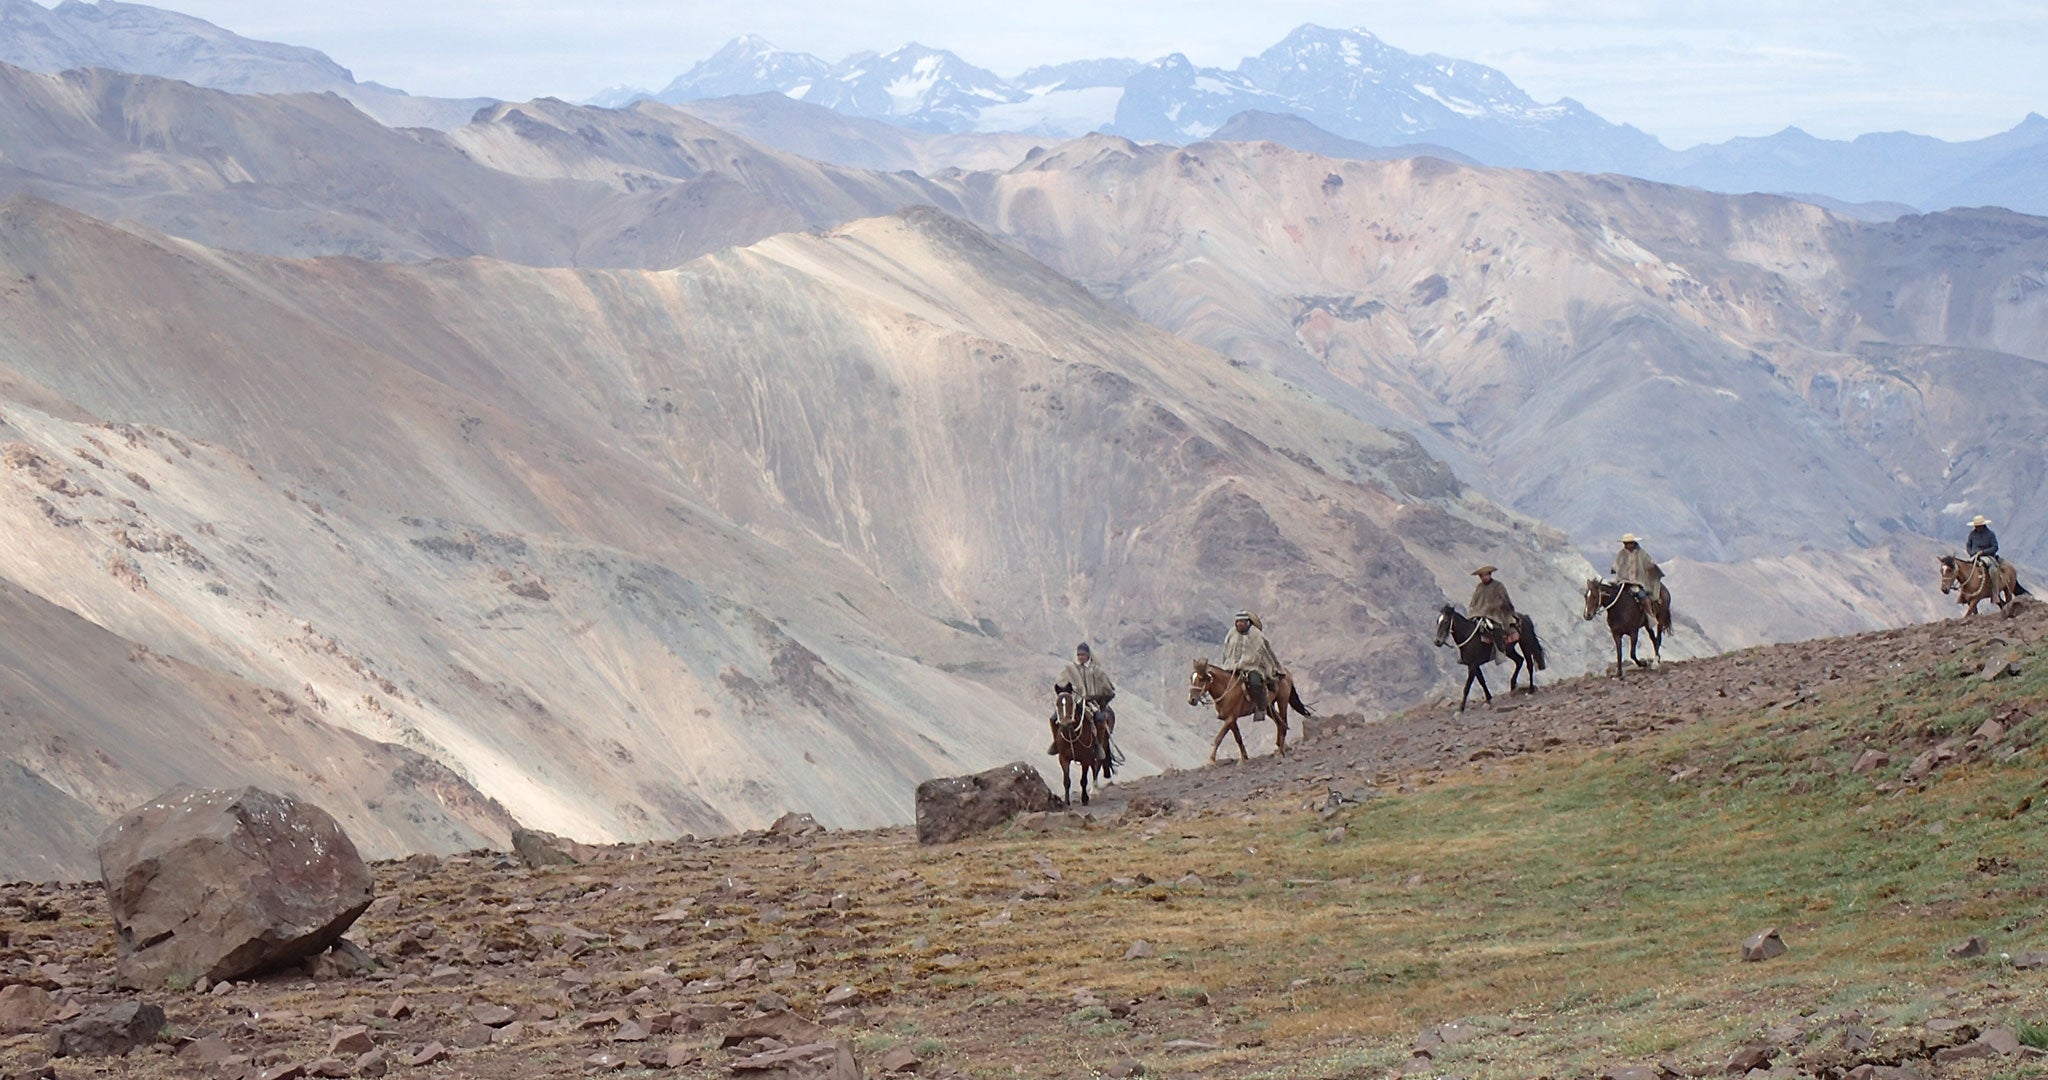 Men riding horses through the Mountains in Chile